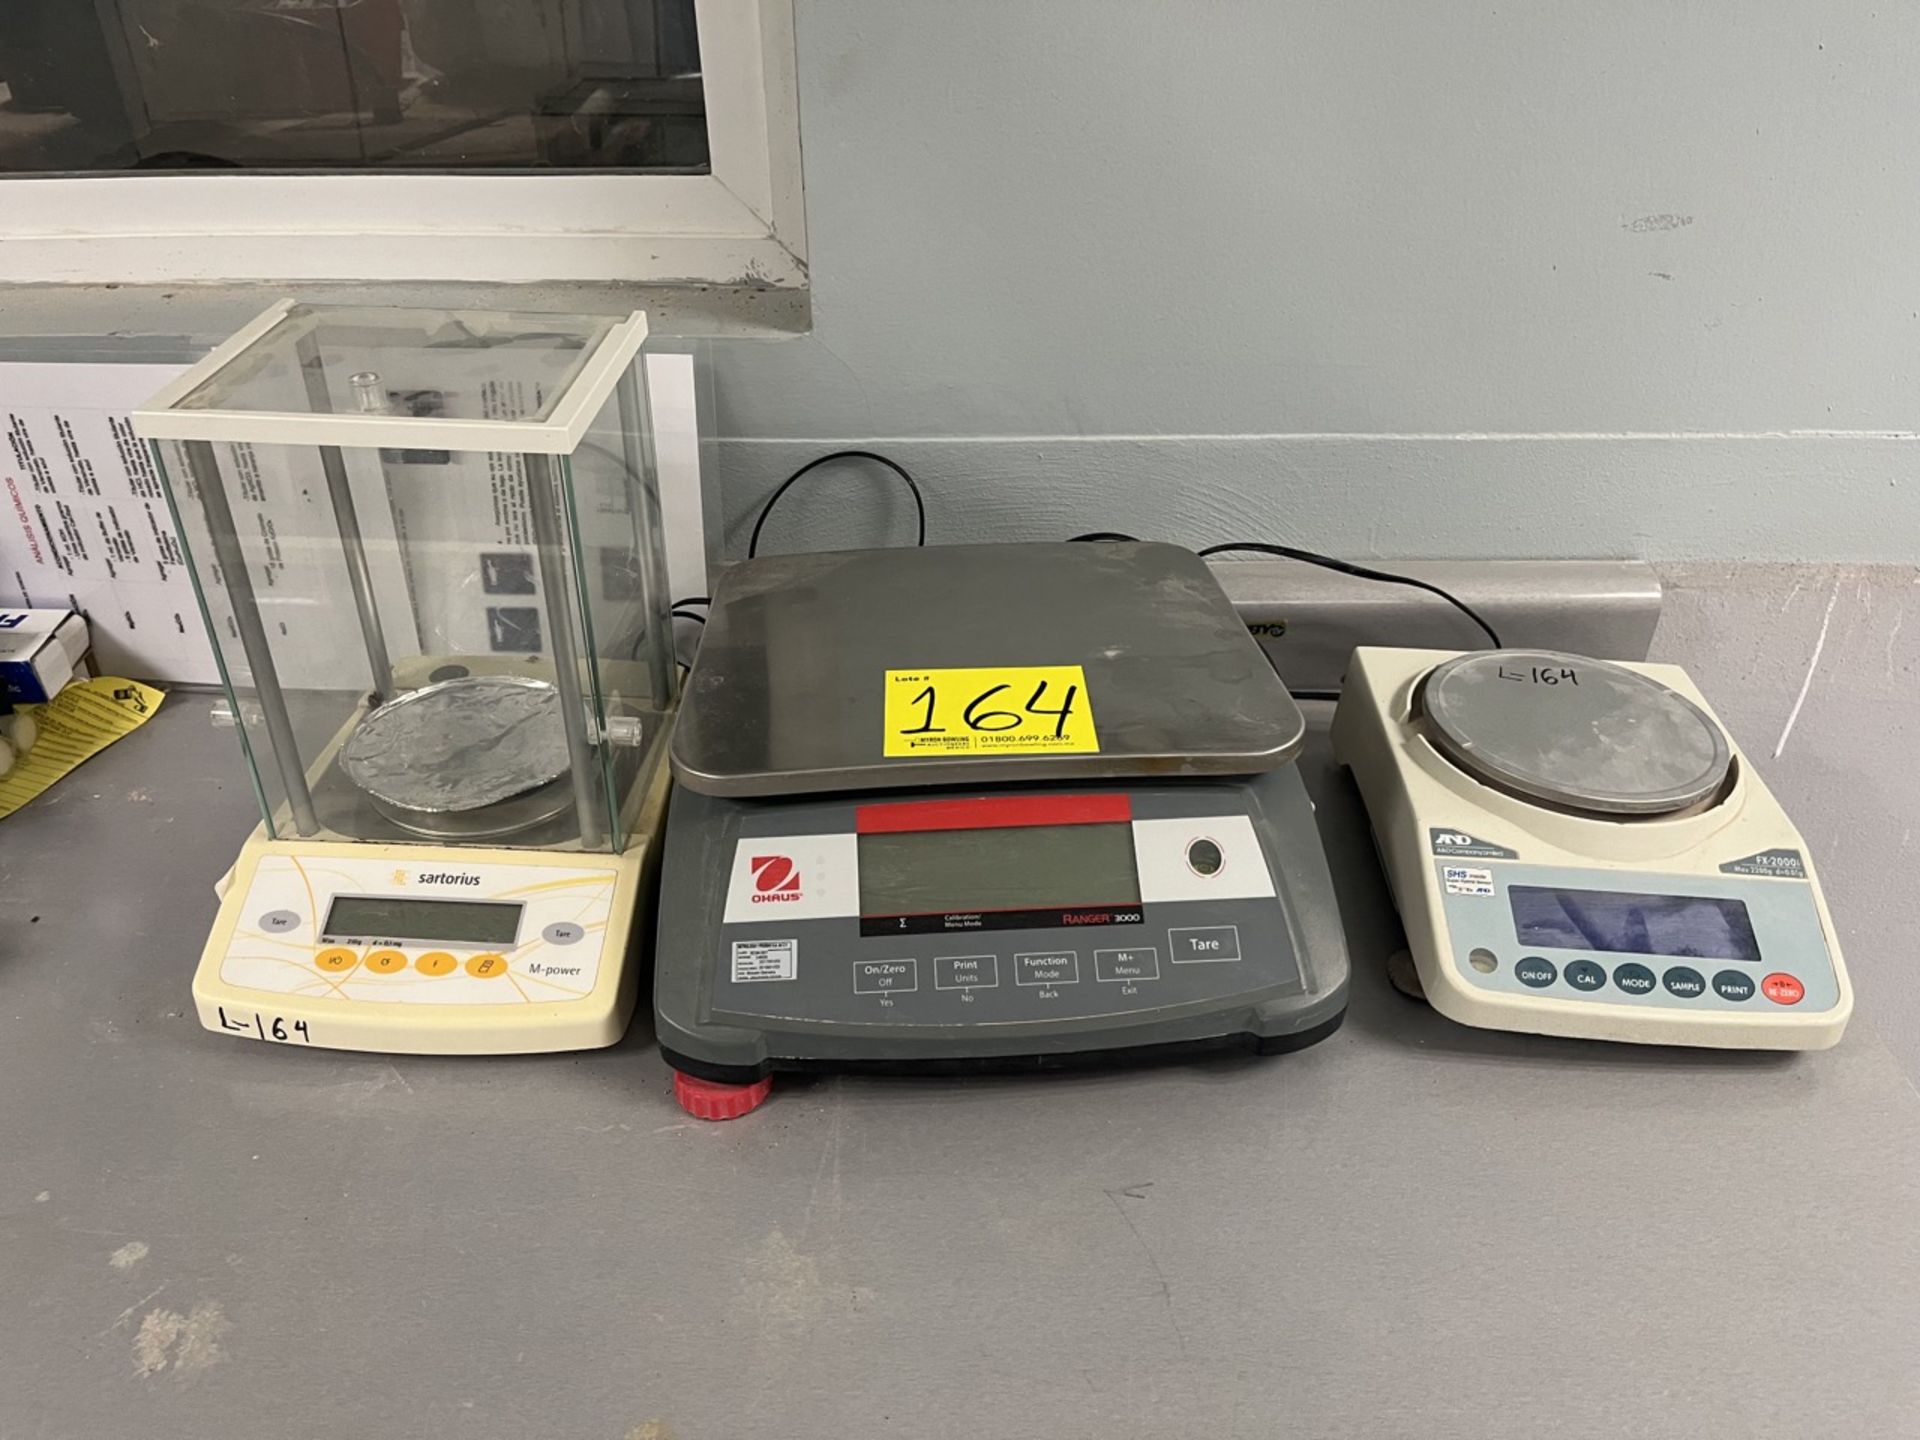 Set of 3 precision laboratory scales includes: Sartorius Scales, Model M-power; Ohaus Scales, Model